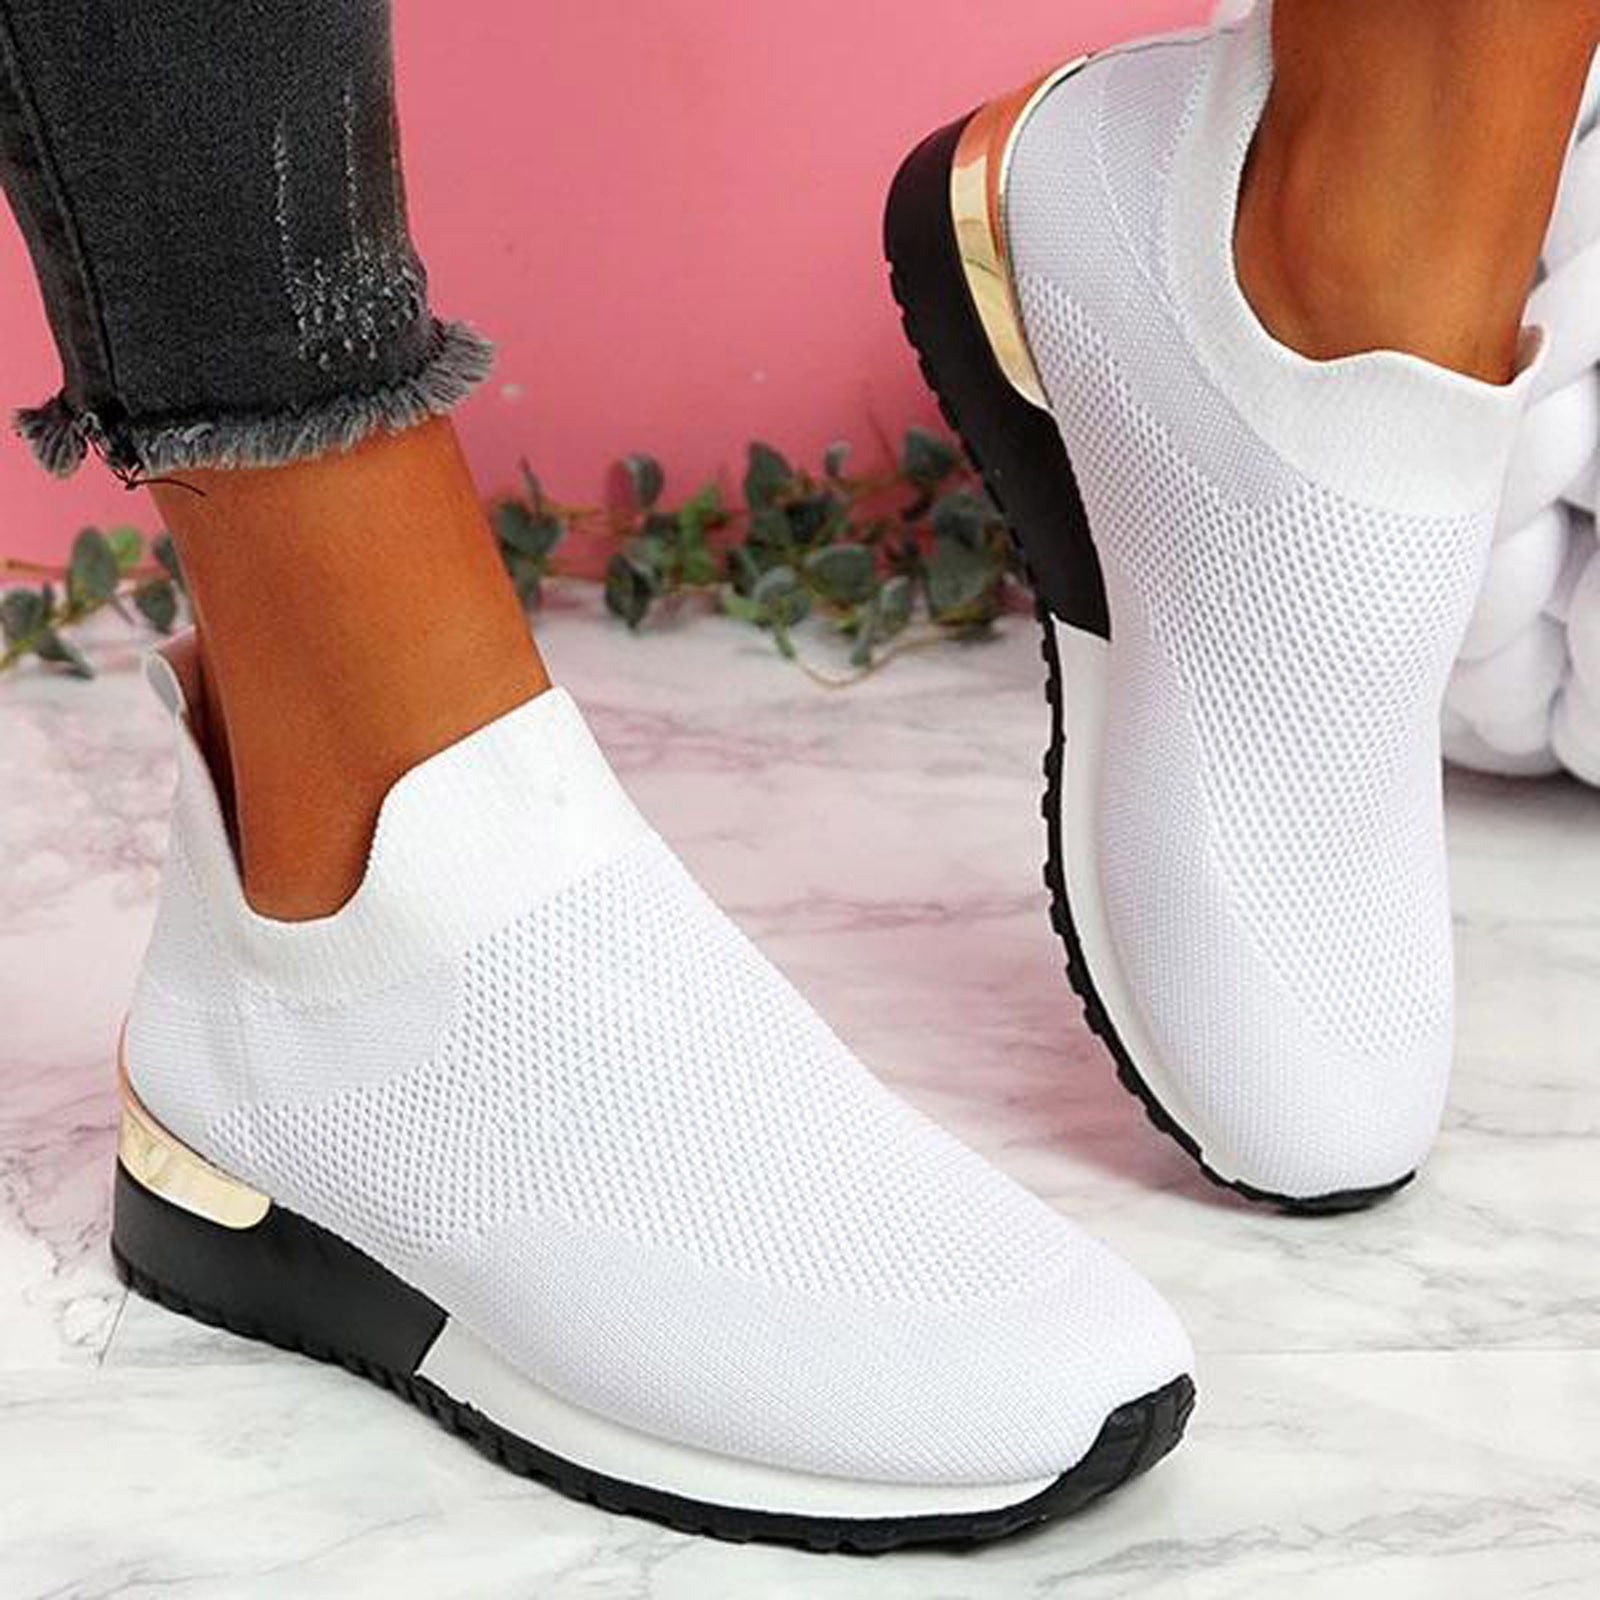 Sneakers women's Rhinestone Lace Patch Contrast Sequin Women Sneakers  Tennis Shoes For Woman Loafers Crystal shoes Zapatos Mujer